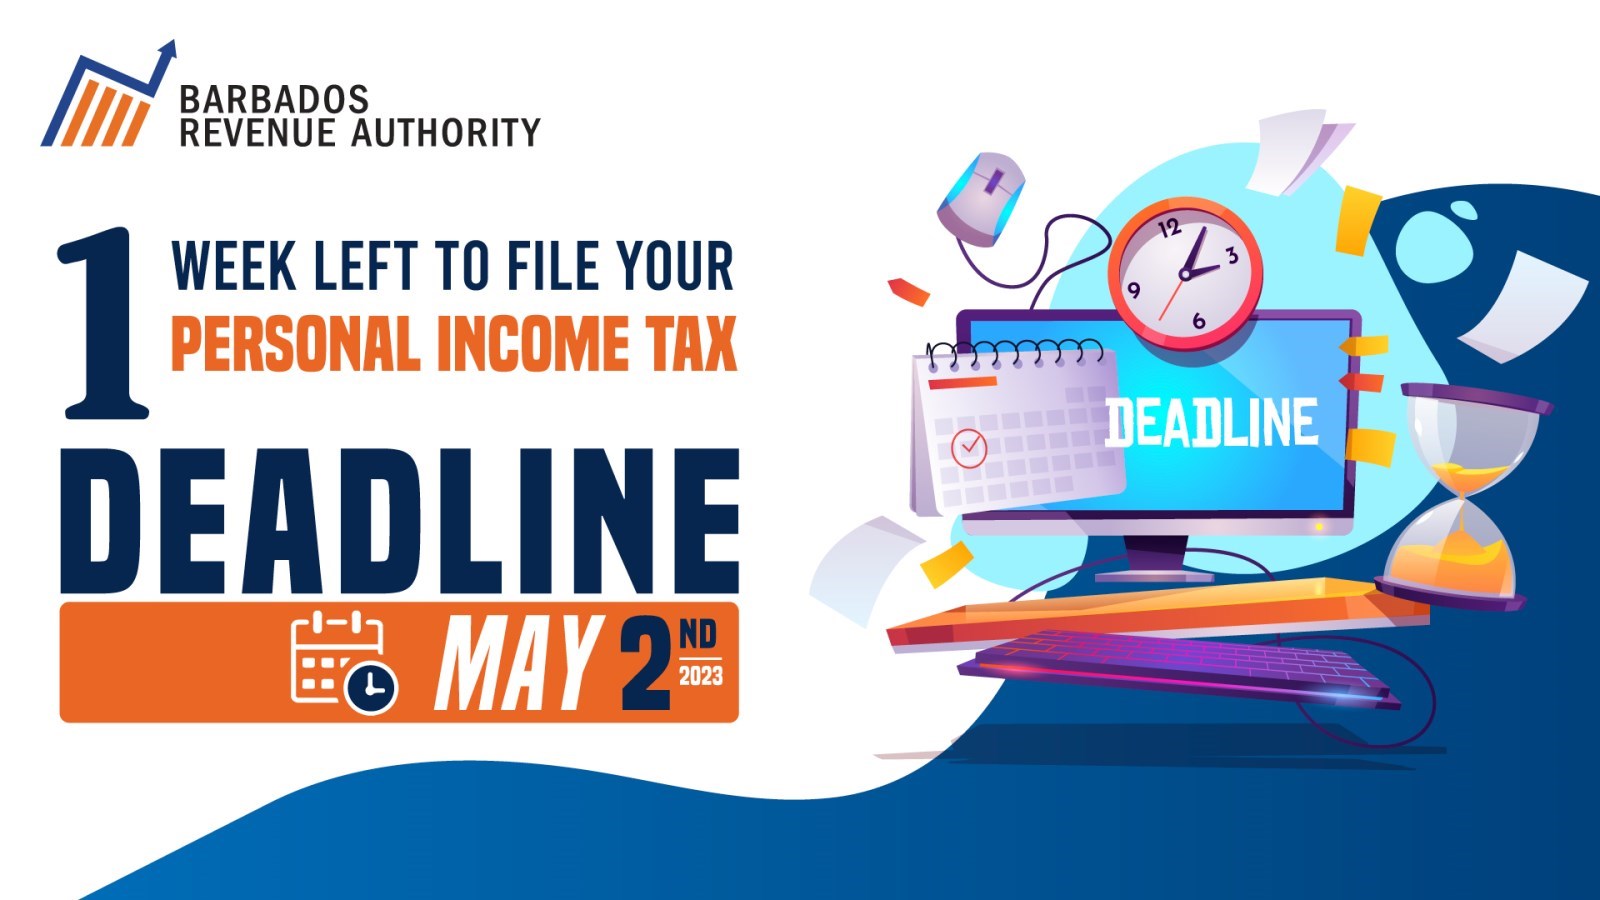 Personal Income Tax Deadline is May 2